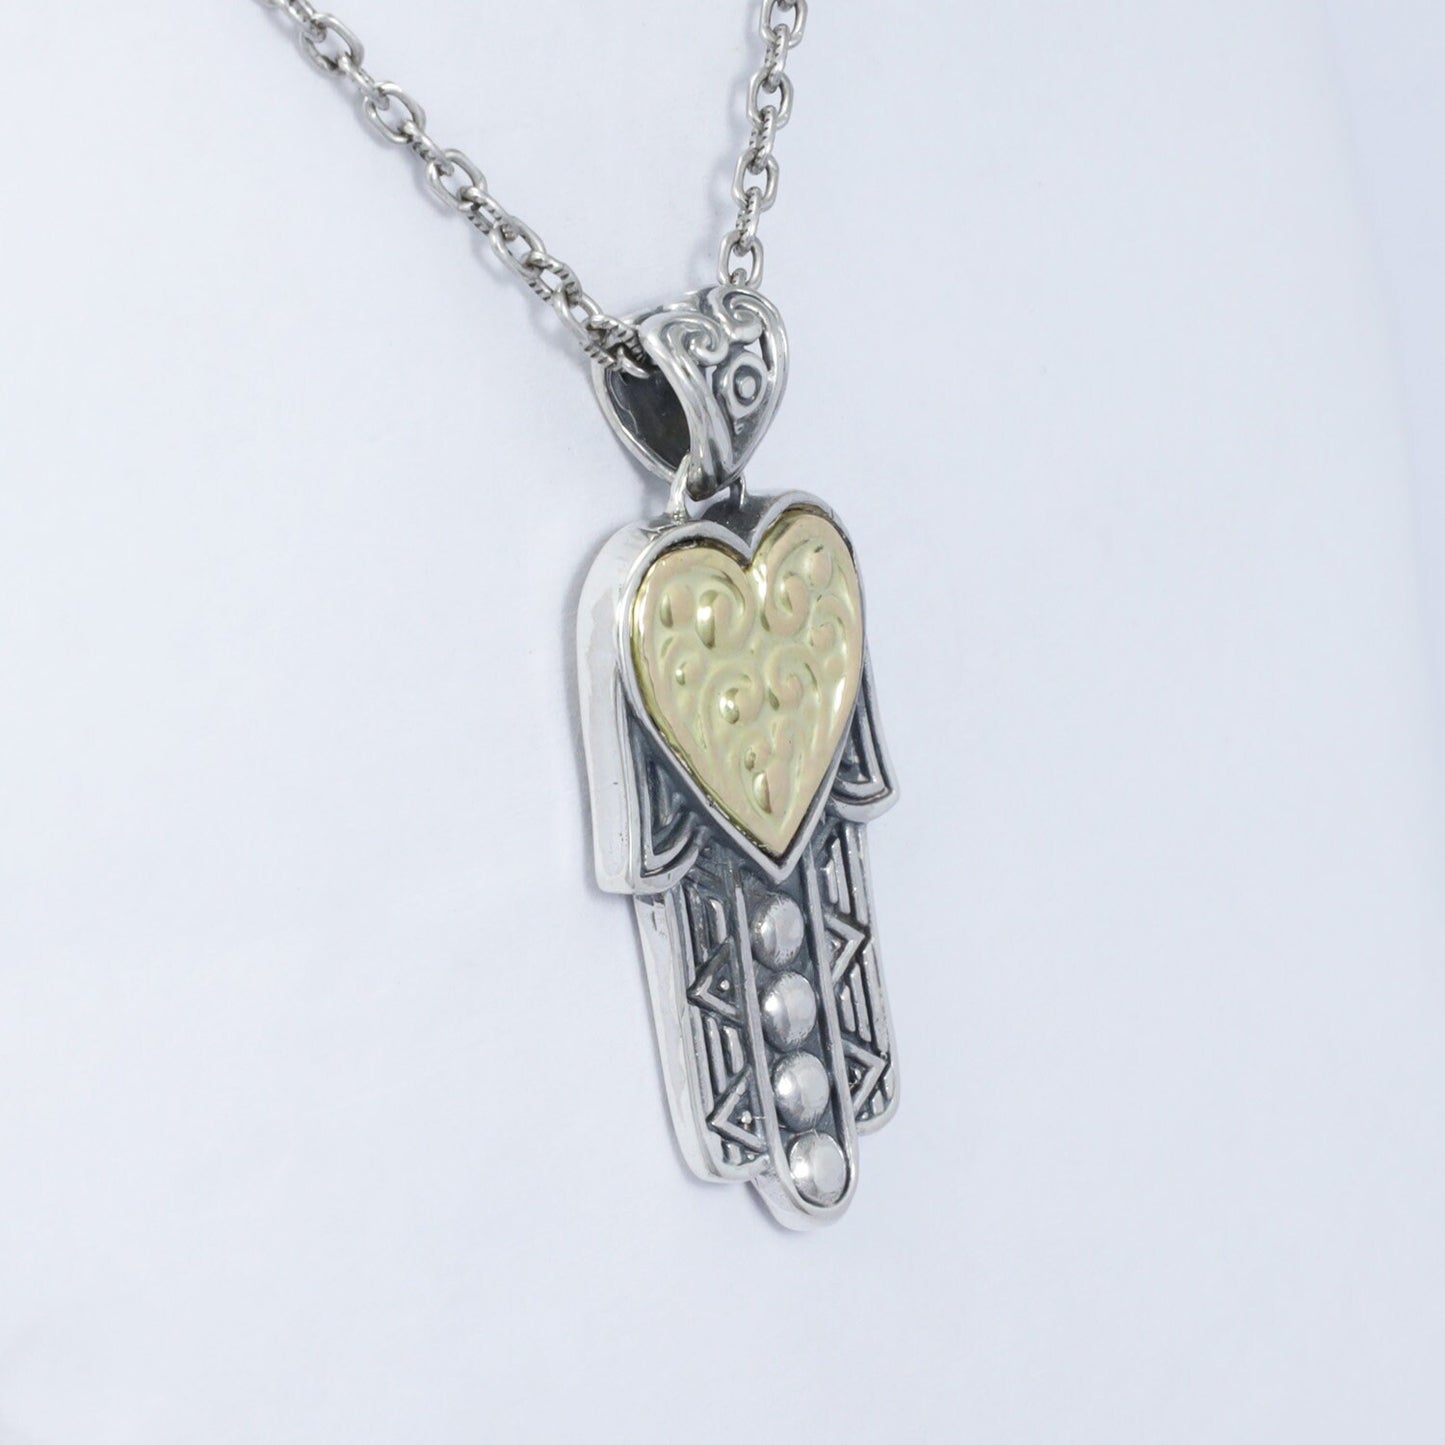 925 sterling silver hamsa hand pendant with genuine 18K yellow gold decorated with filigree